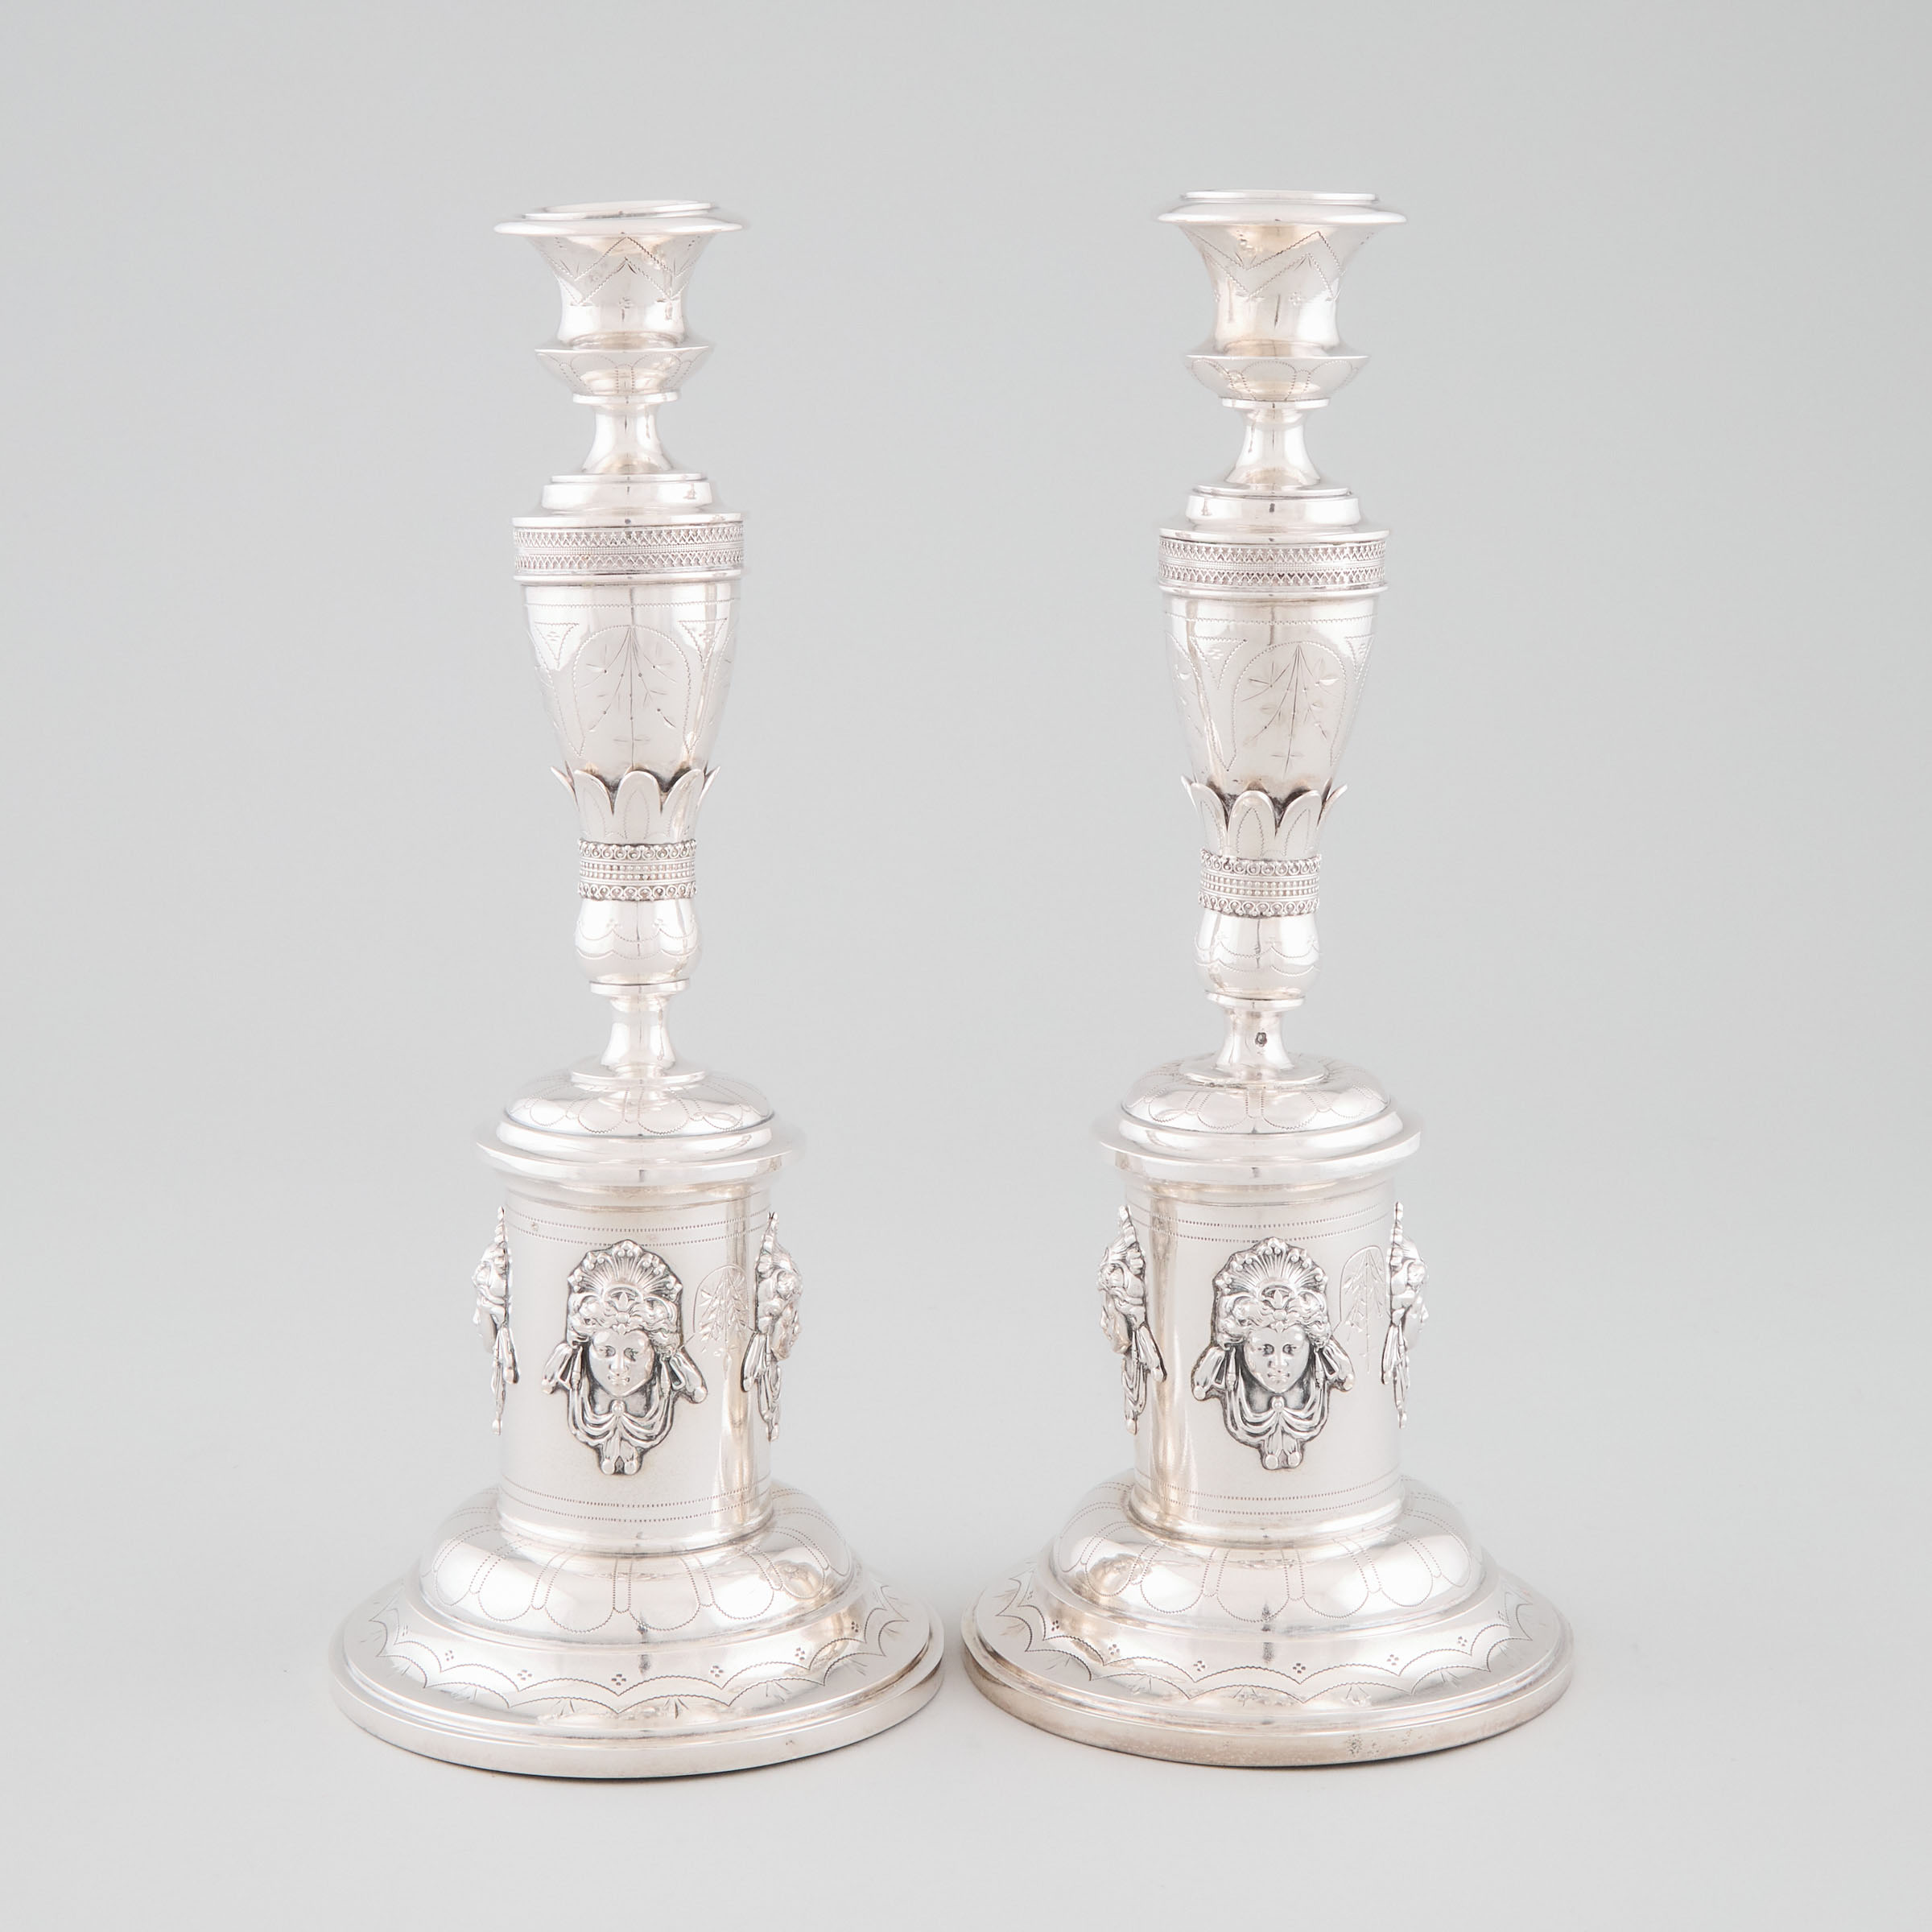 Pair of Austro-Hungarian Silver Table Candlesticks, late 19th century